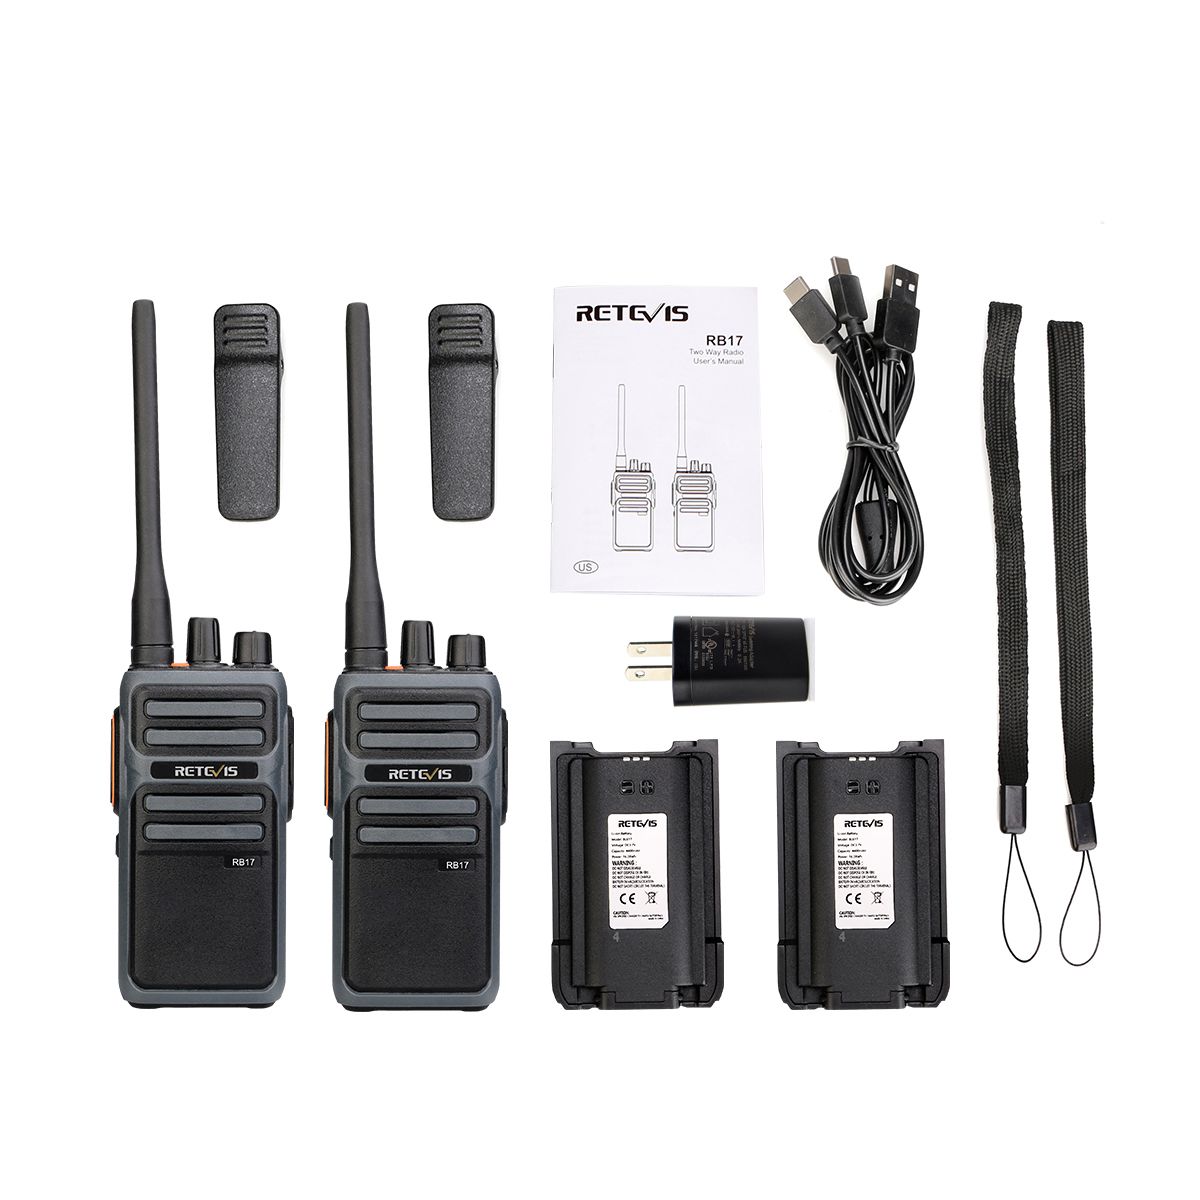 Retevis-RB617-PMR-FRS-446--License-free-16-Channel-Two-Way-Radio-Intercom-Console-Large-Capacity-Typ-1650428